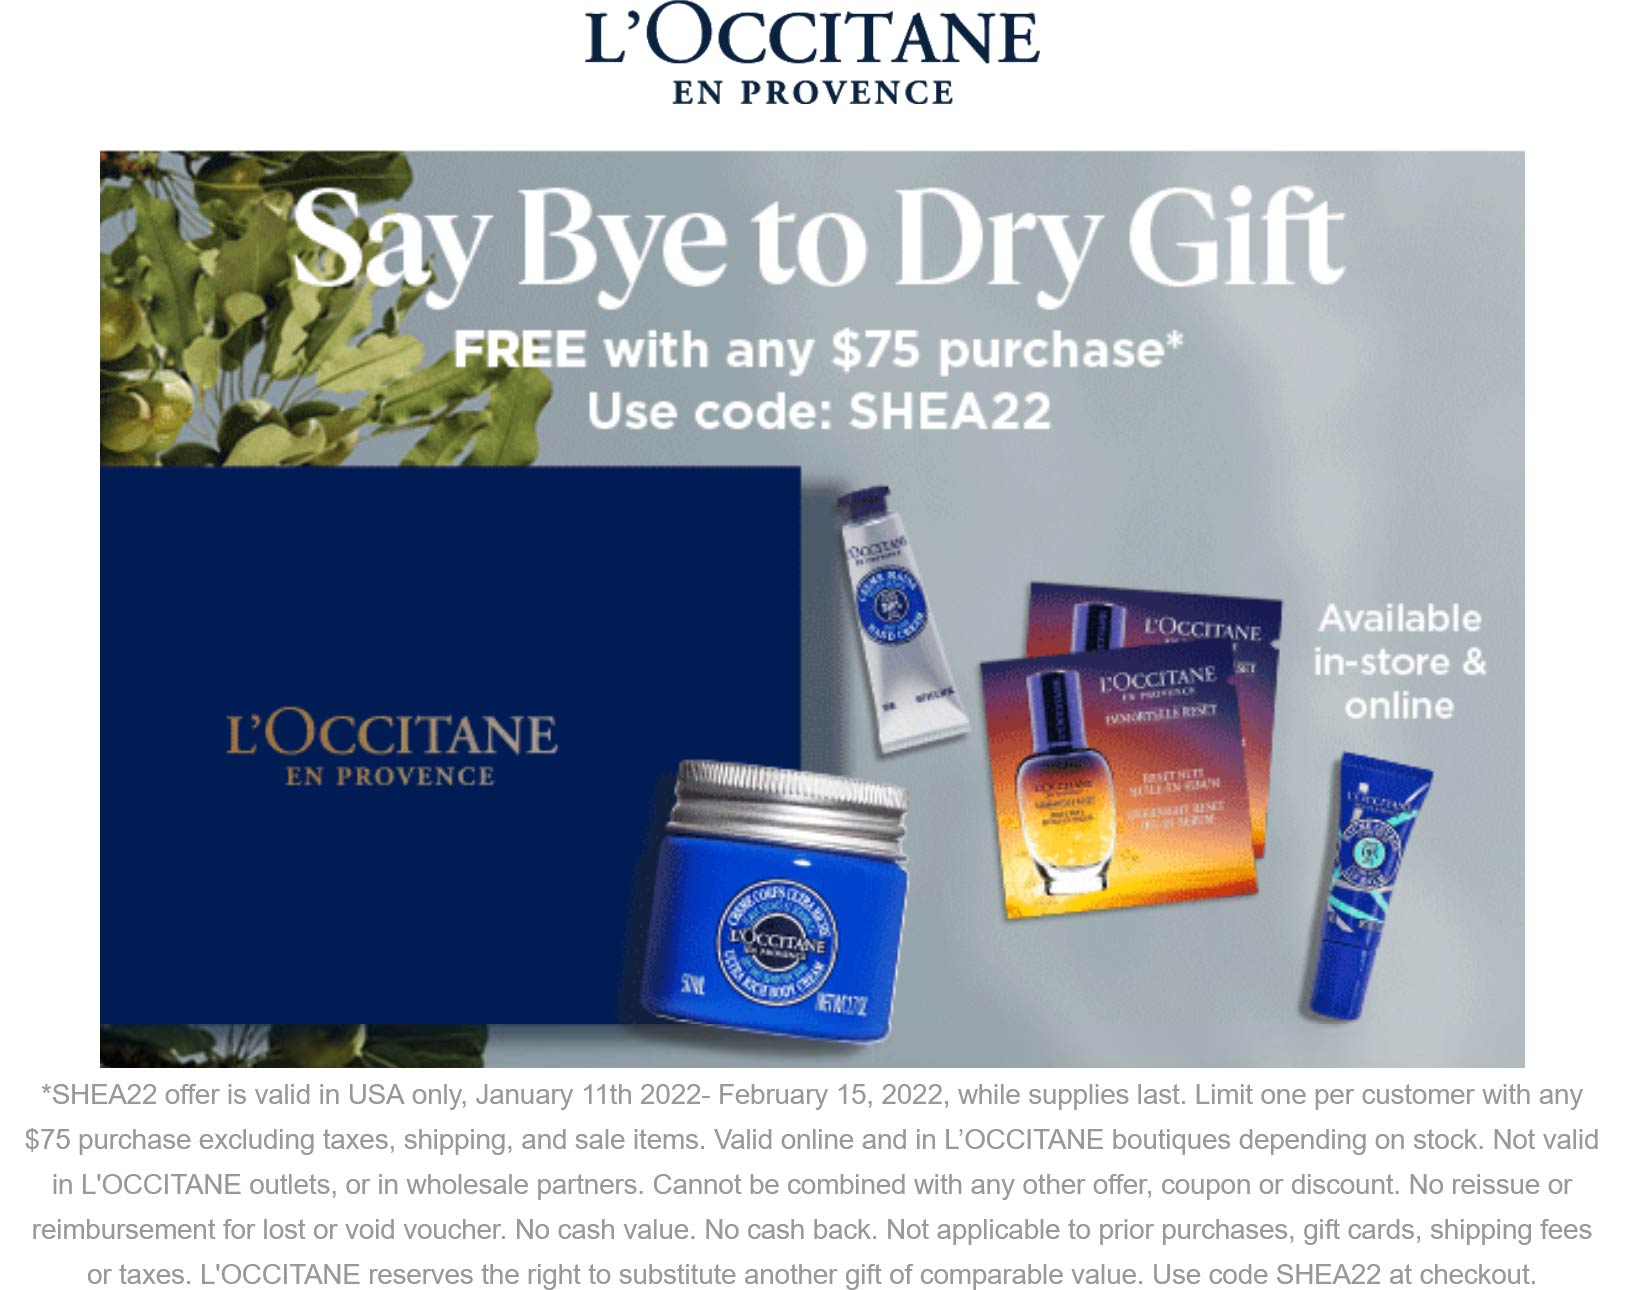 LOccitane stores Coupon  Free Bye to Dry kit with $75 spent at LOccitane via promo code SHEA22 #loccitane 